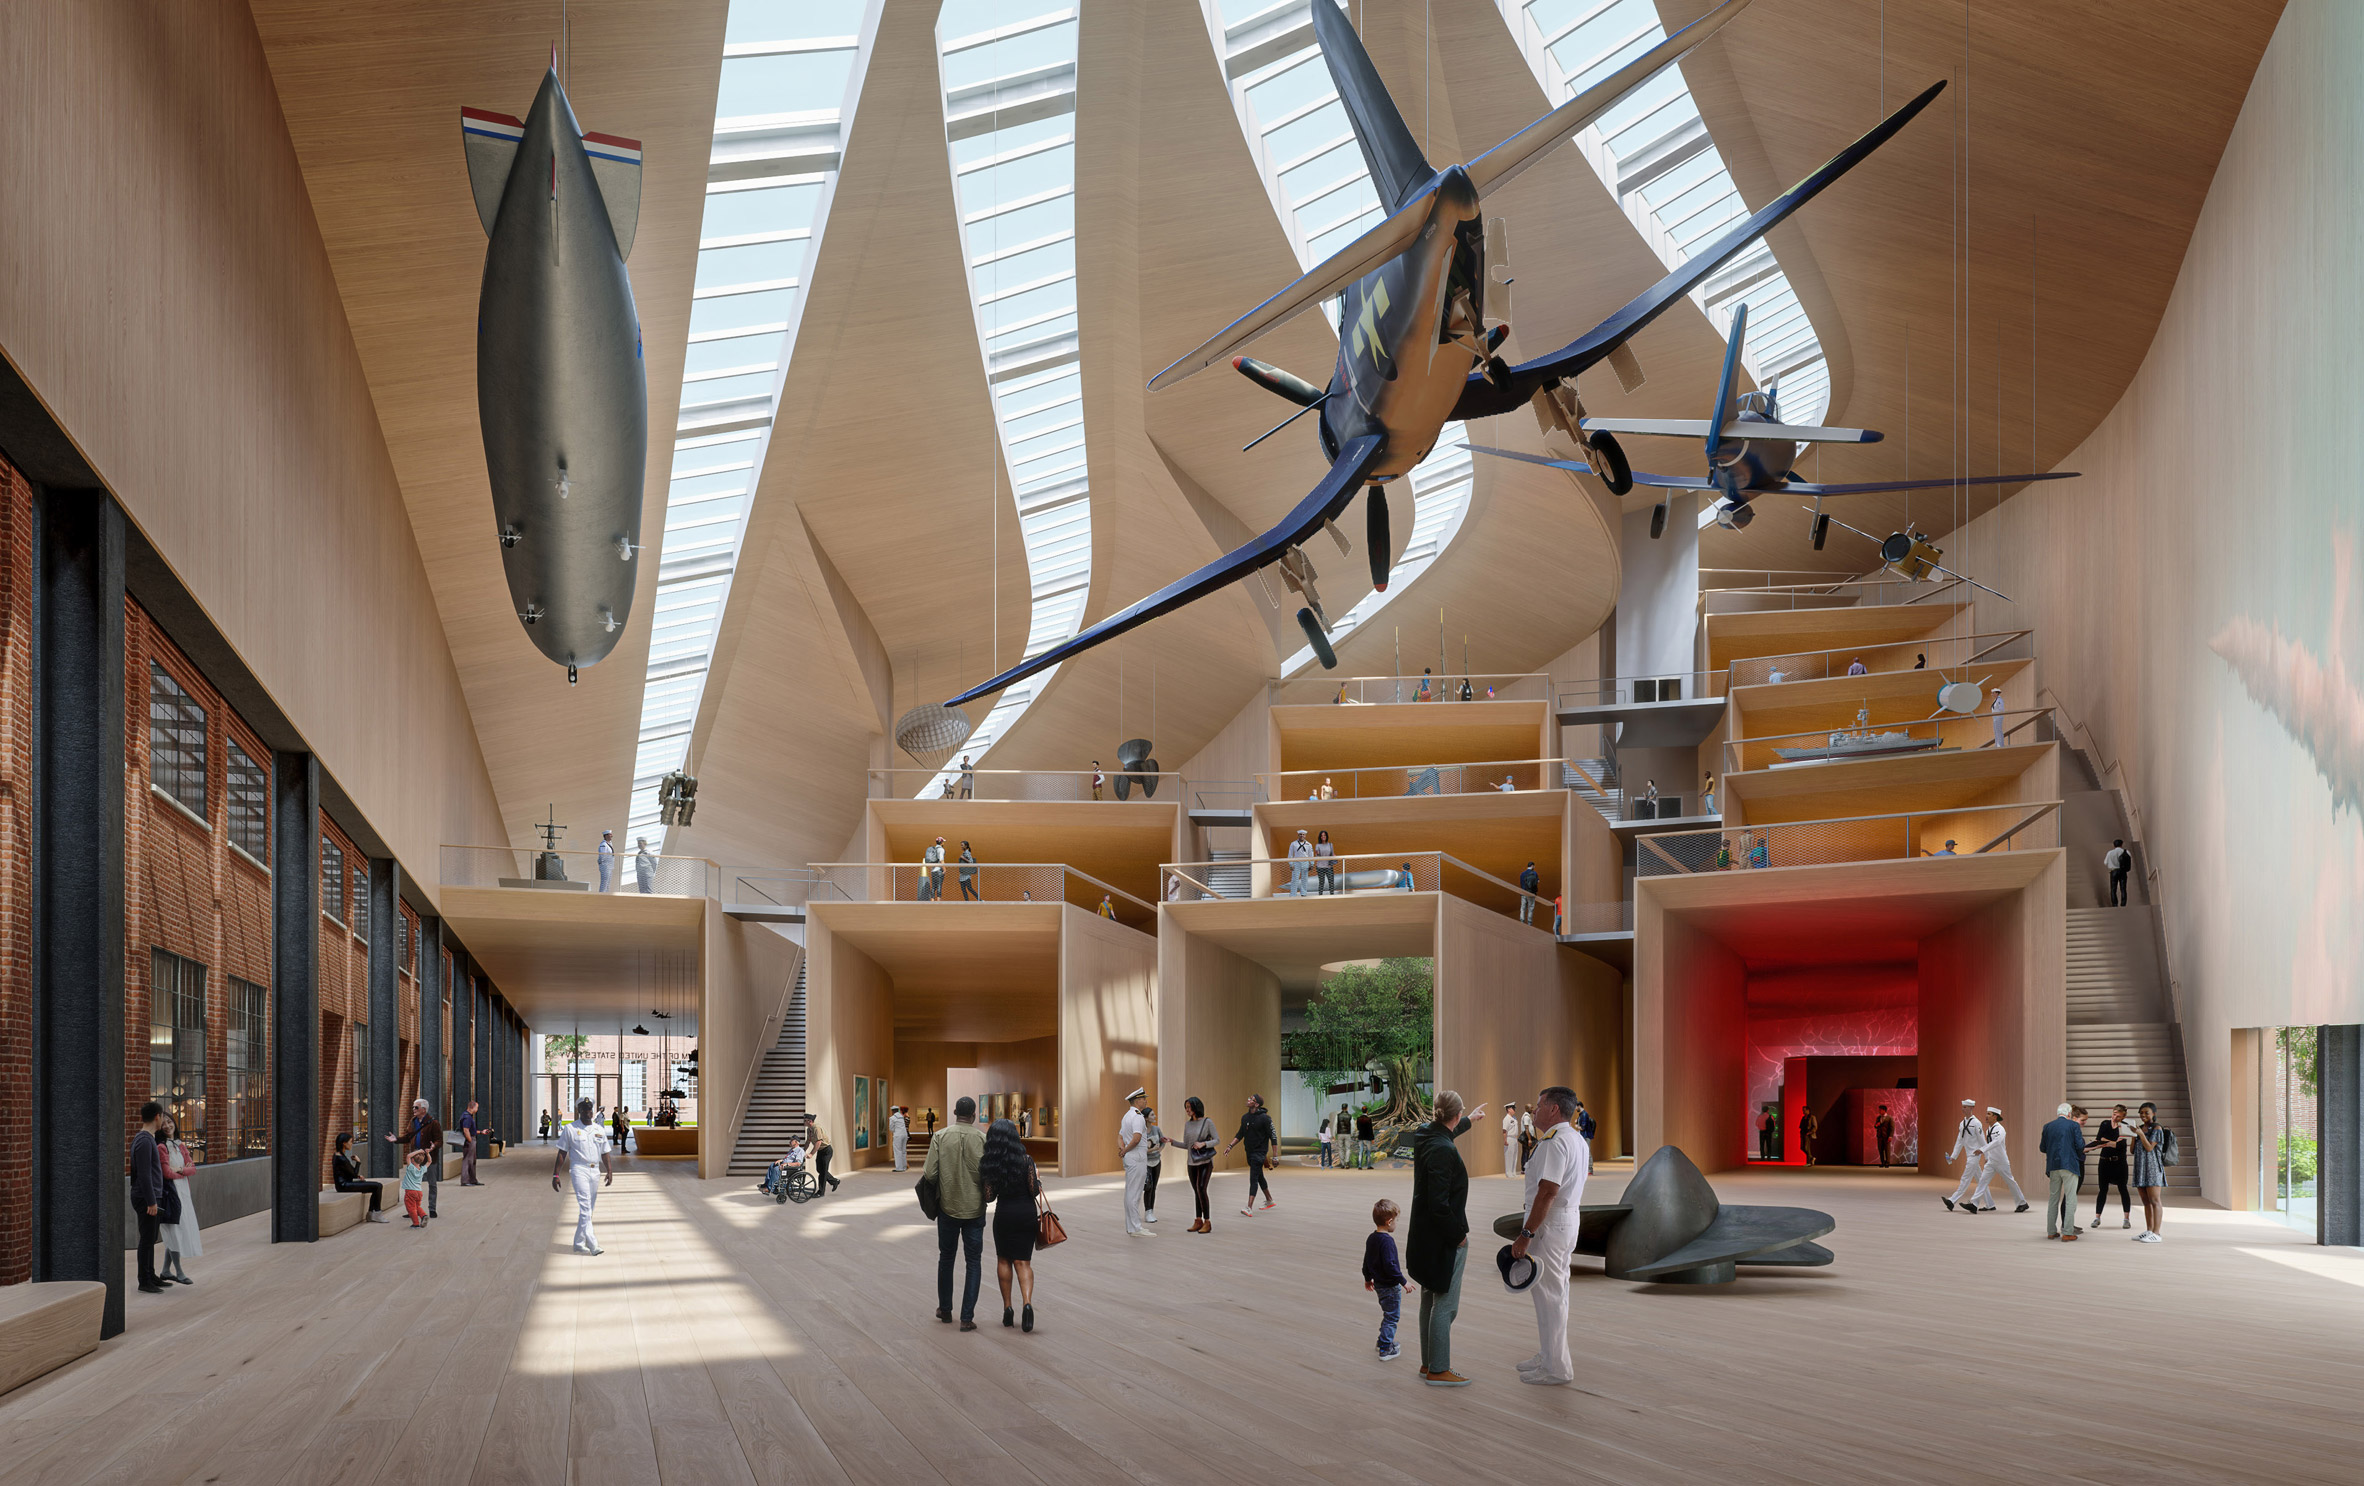 BIG Selected as a Finalist for New United States Navy Museum Design